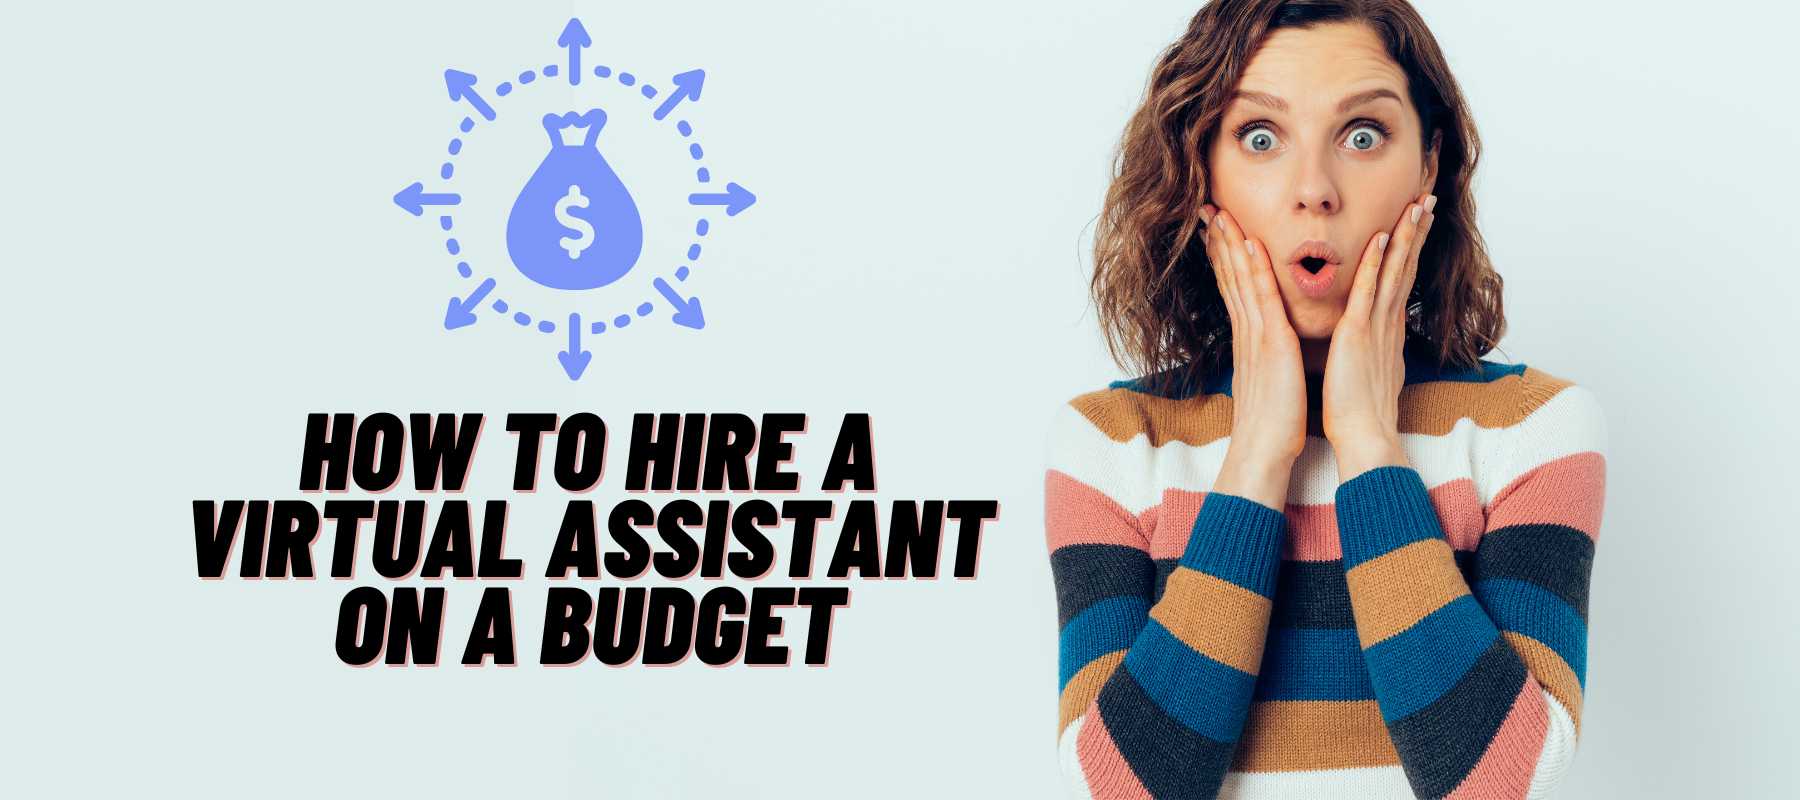 How To Hire A Virtual Assistant On A Budget​